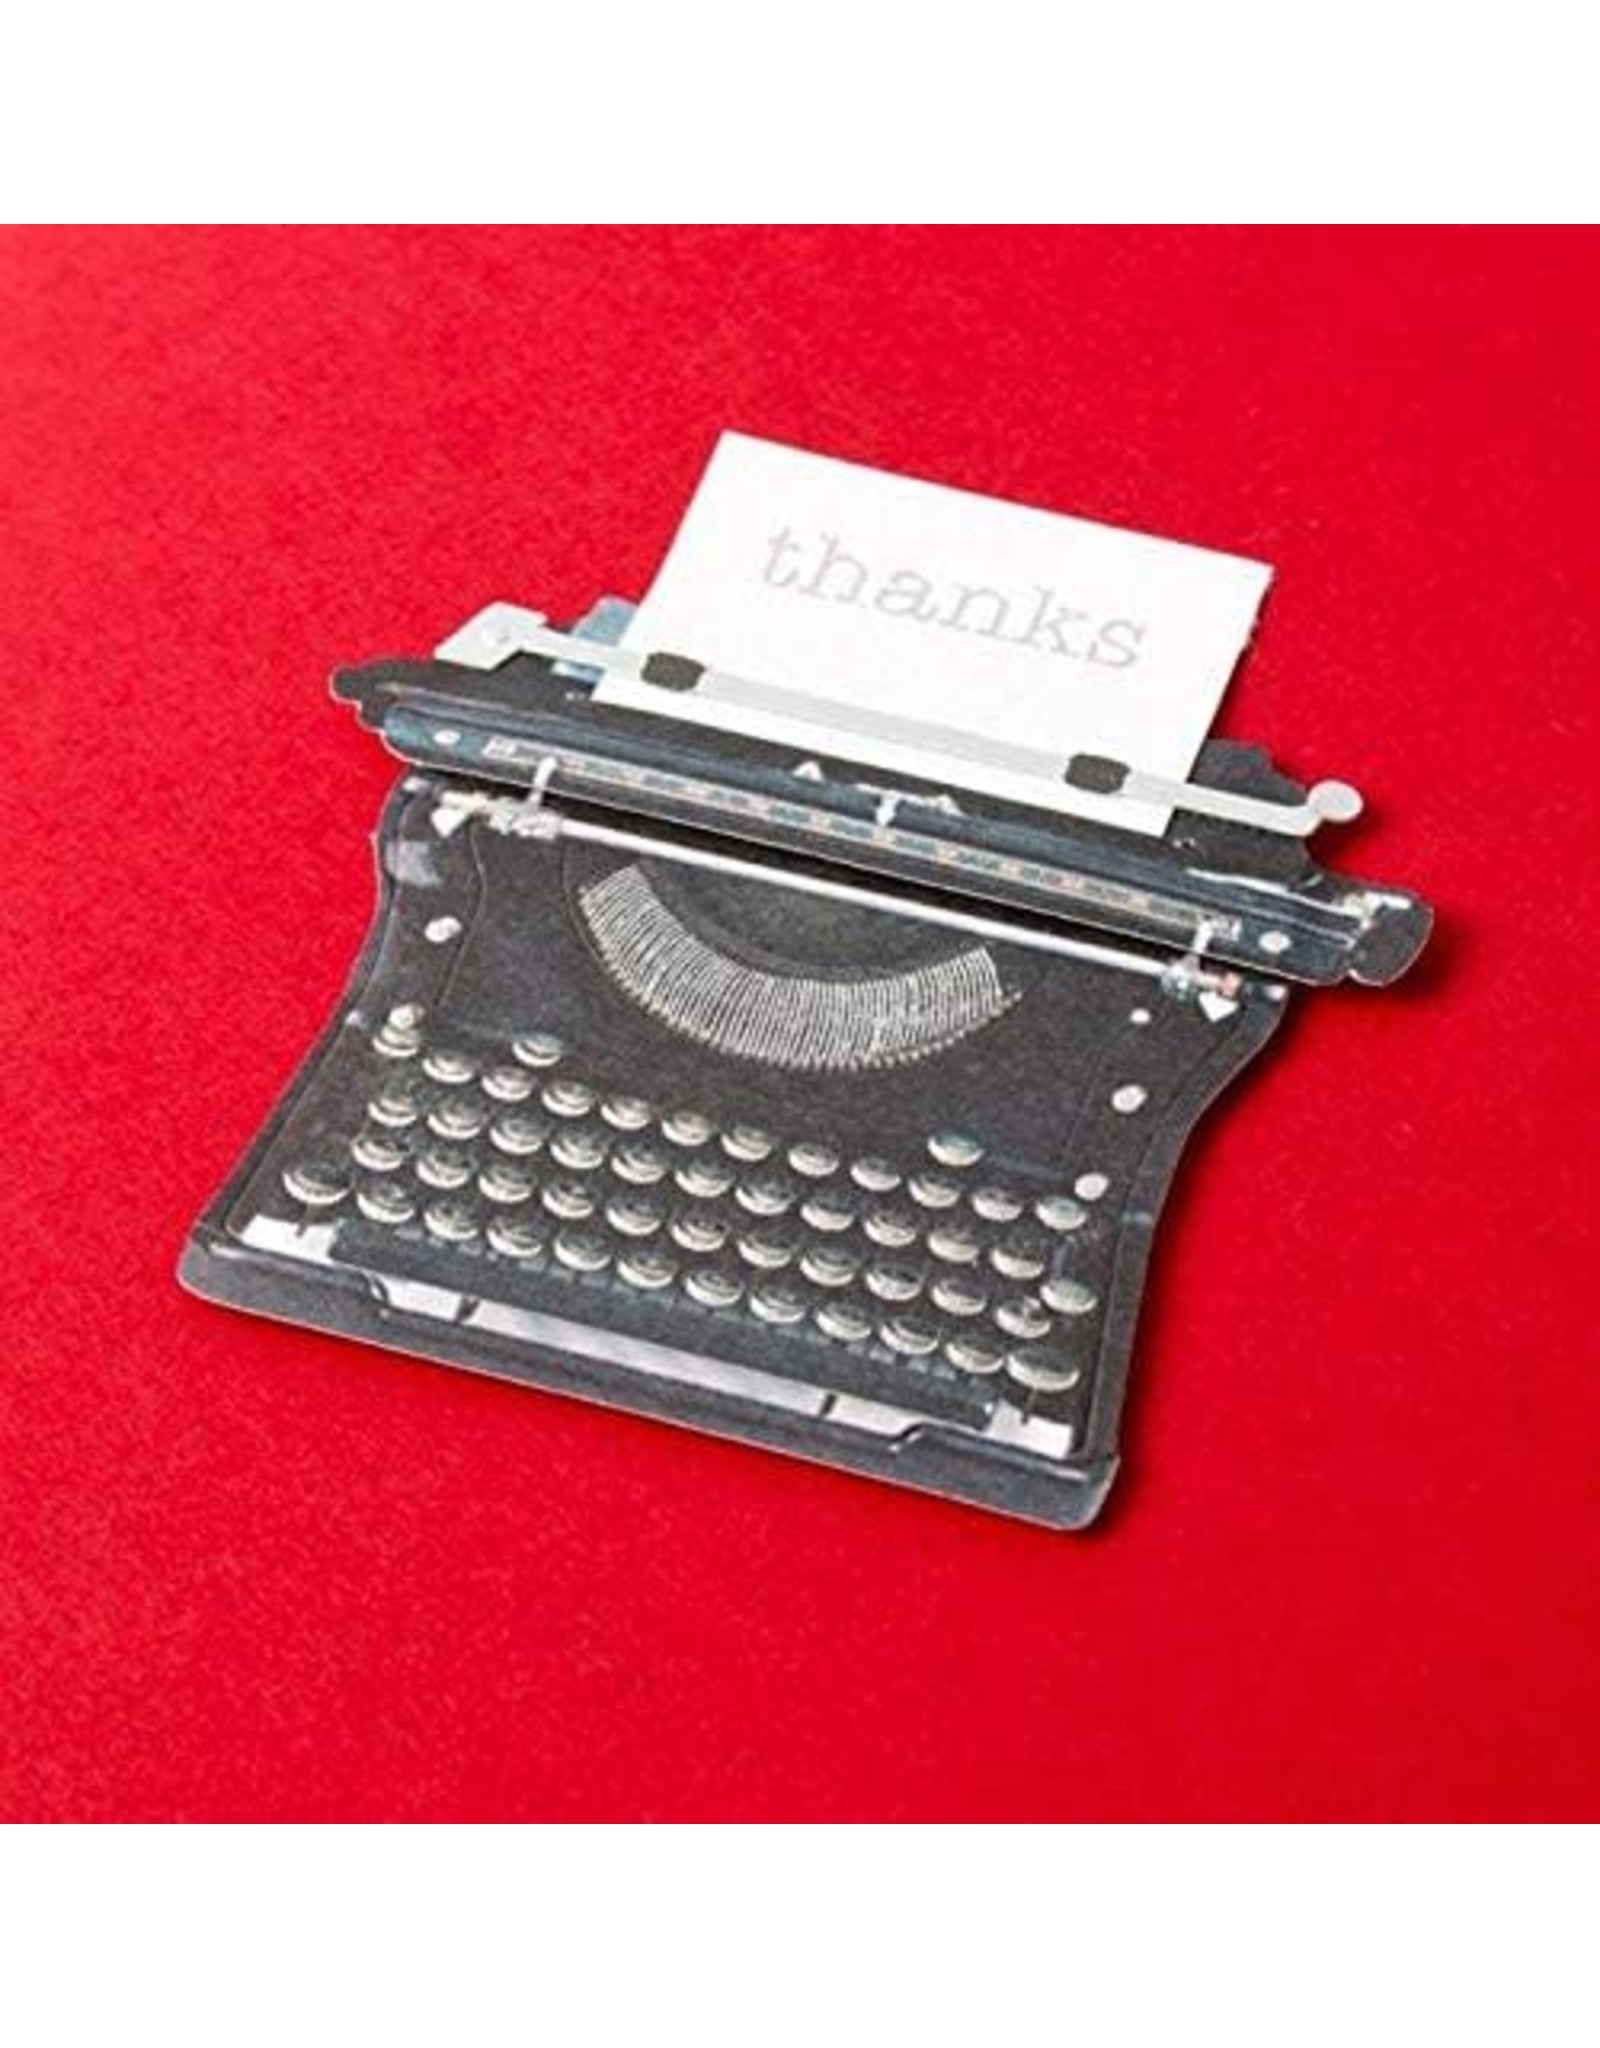 PAPYRUS® Thank You Card Handmade Typewriter With Thanks